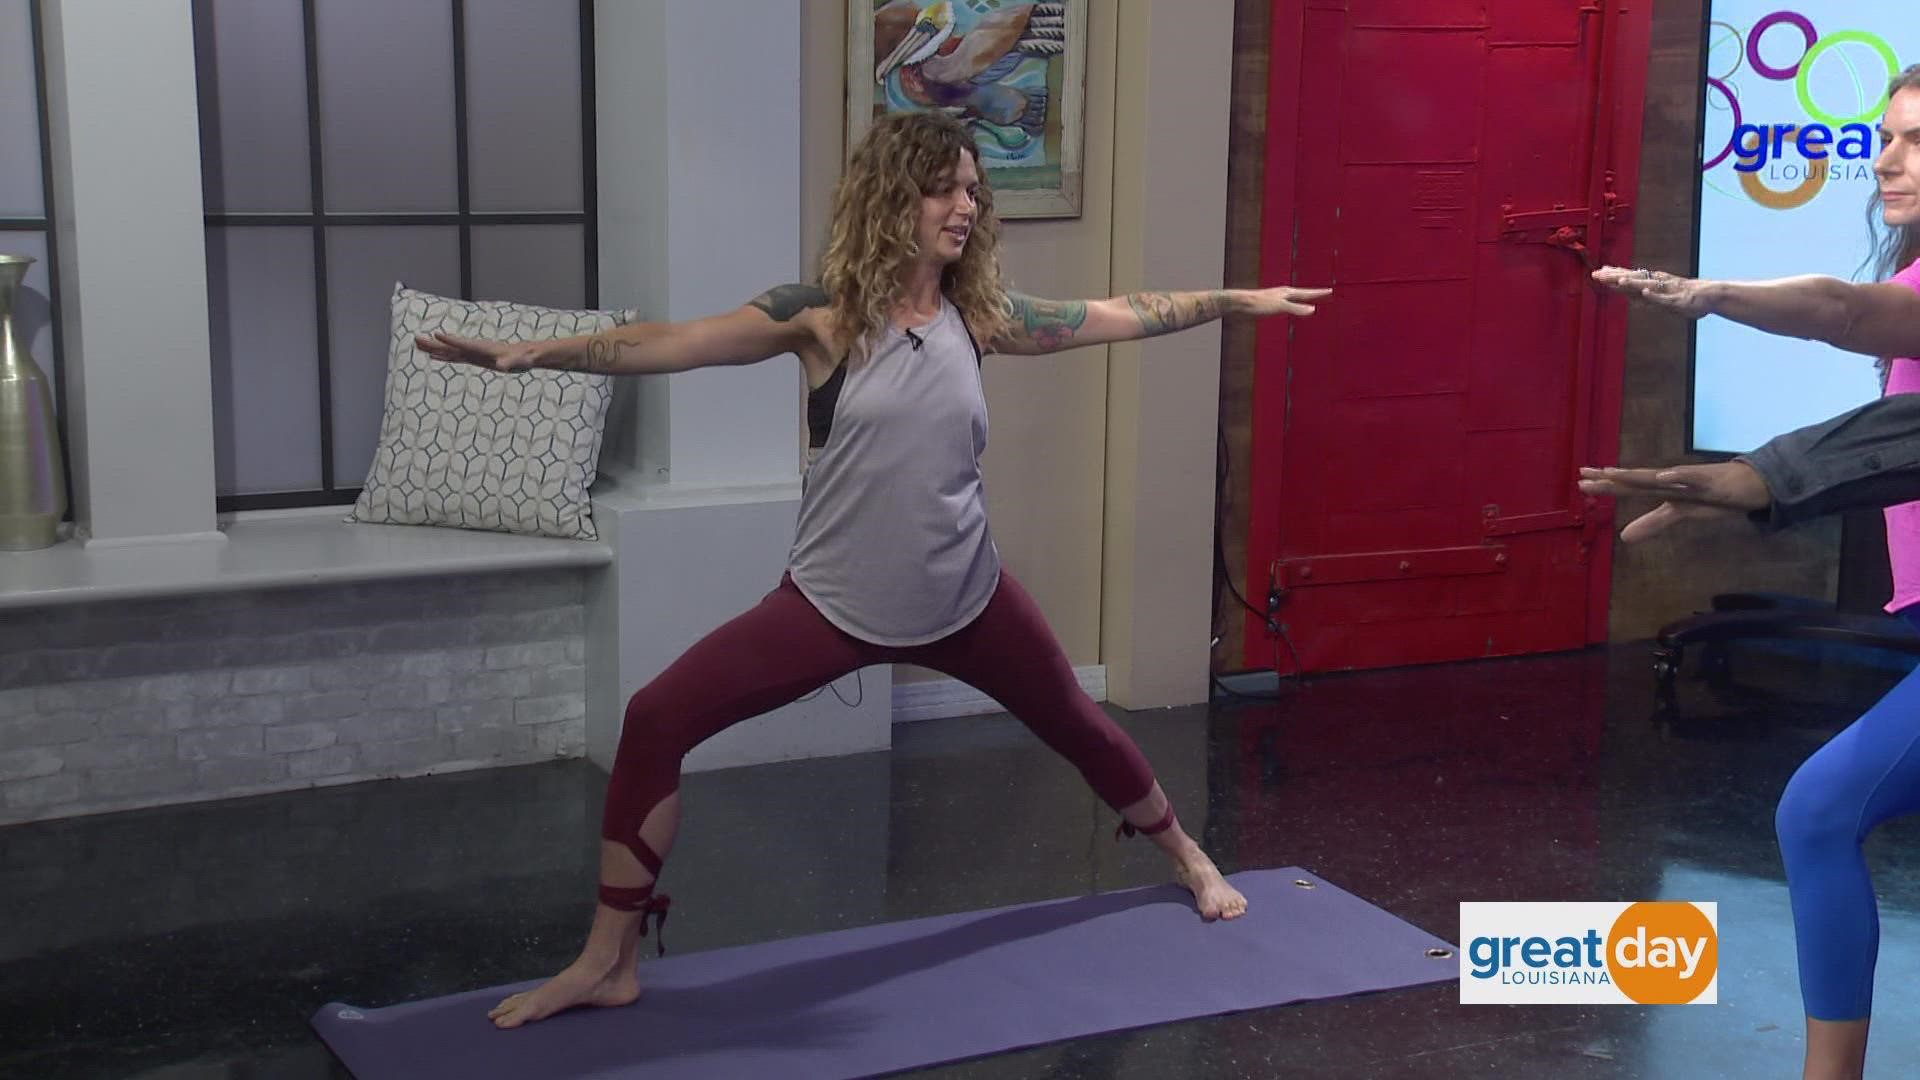 Celebrate National Yoga Month with some beginner moves from the experts at Balance Yoga & Wellness.